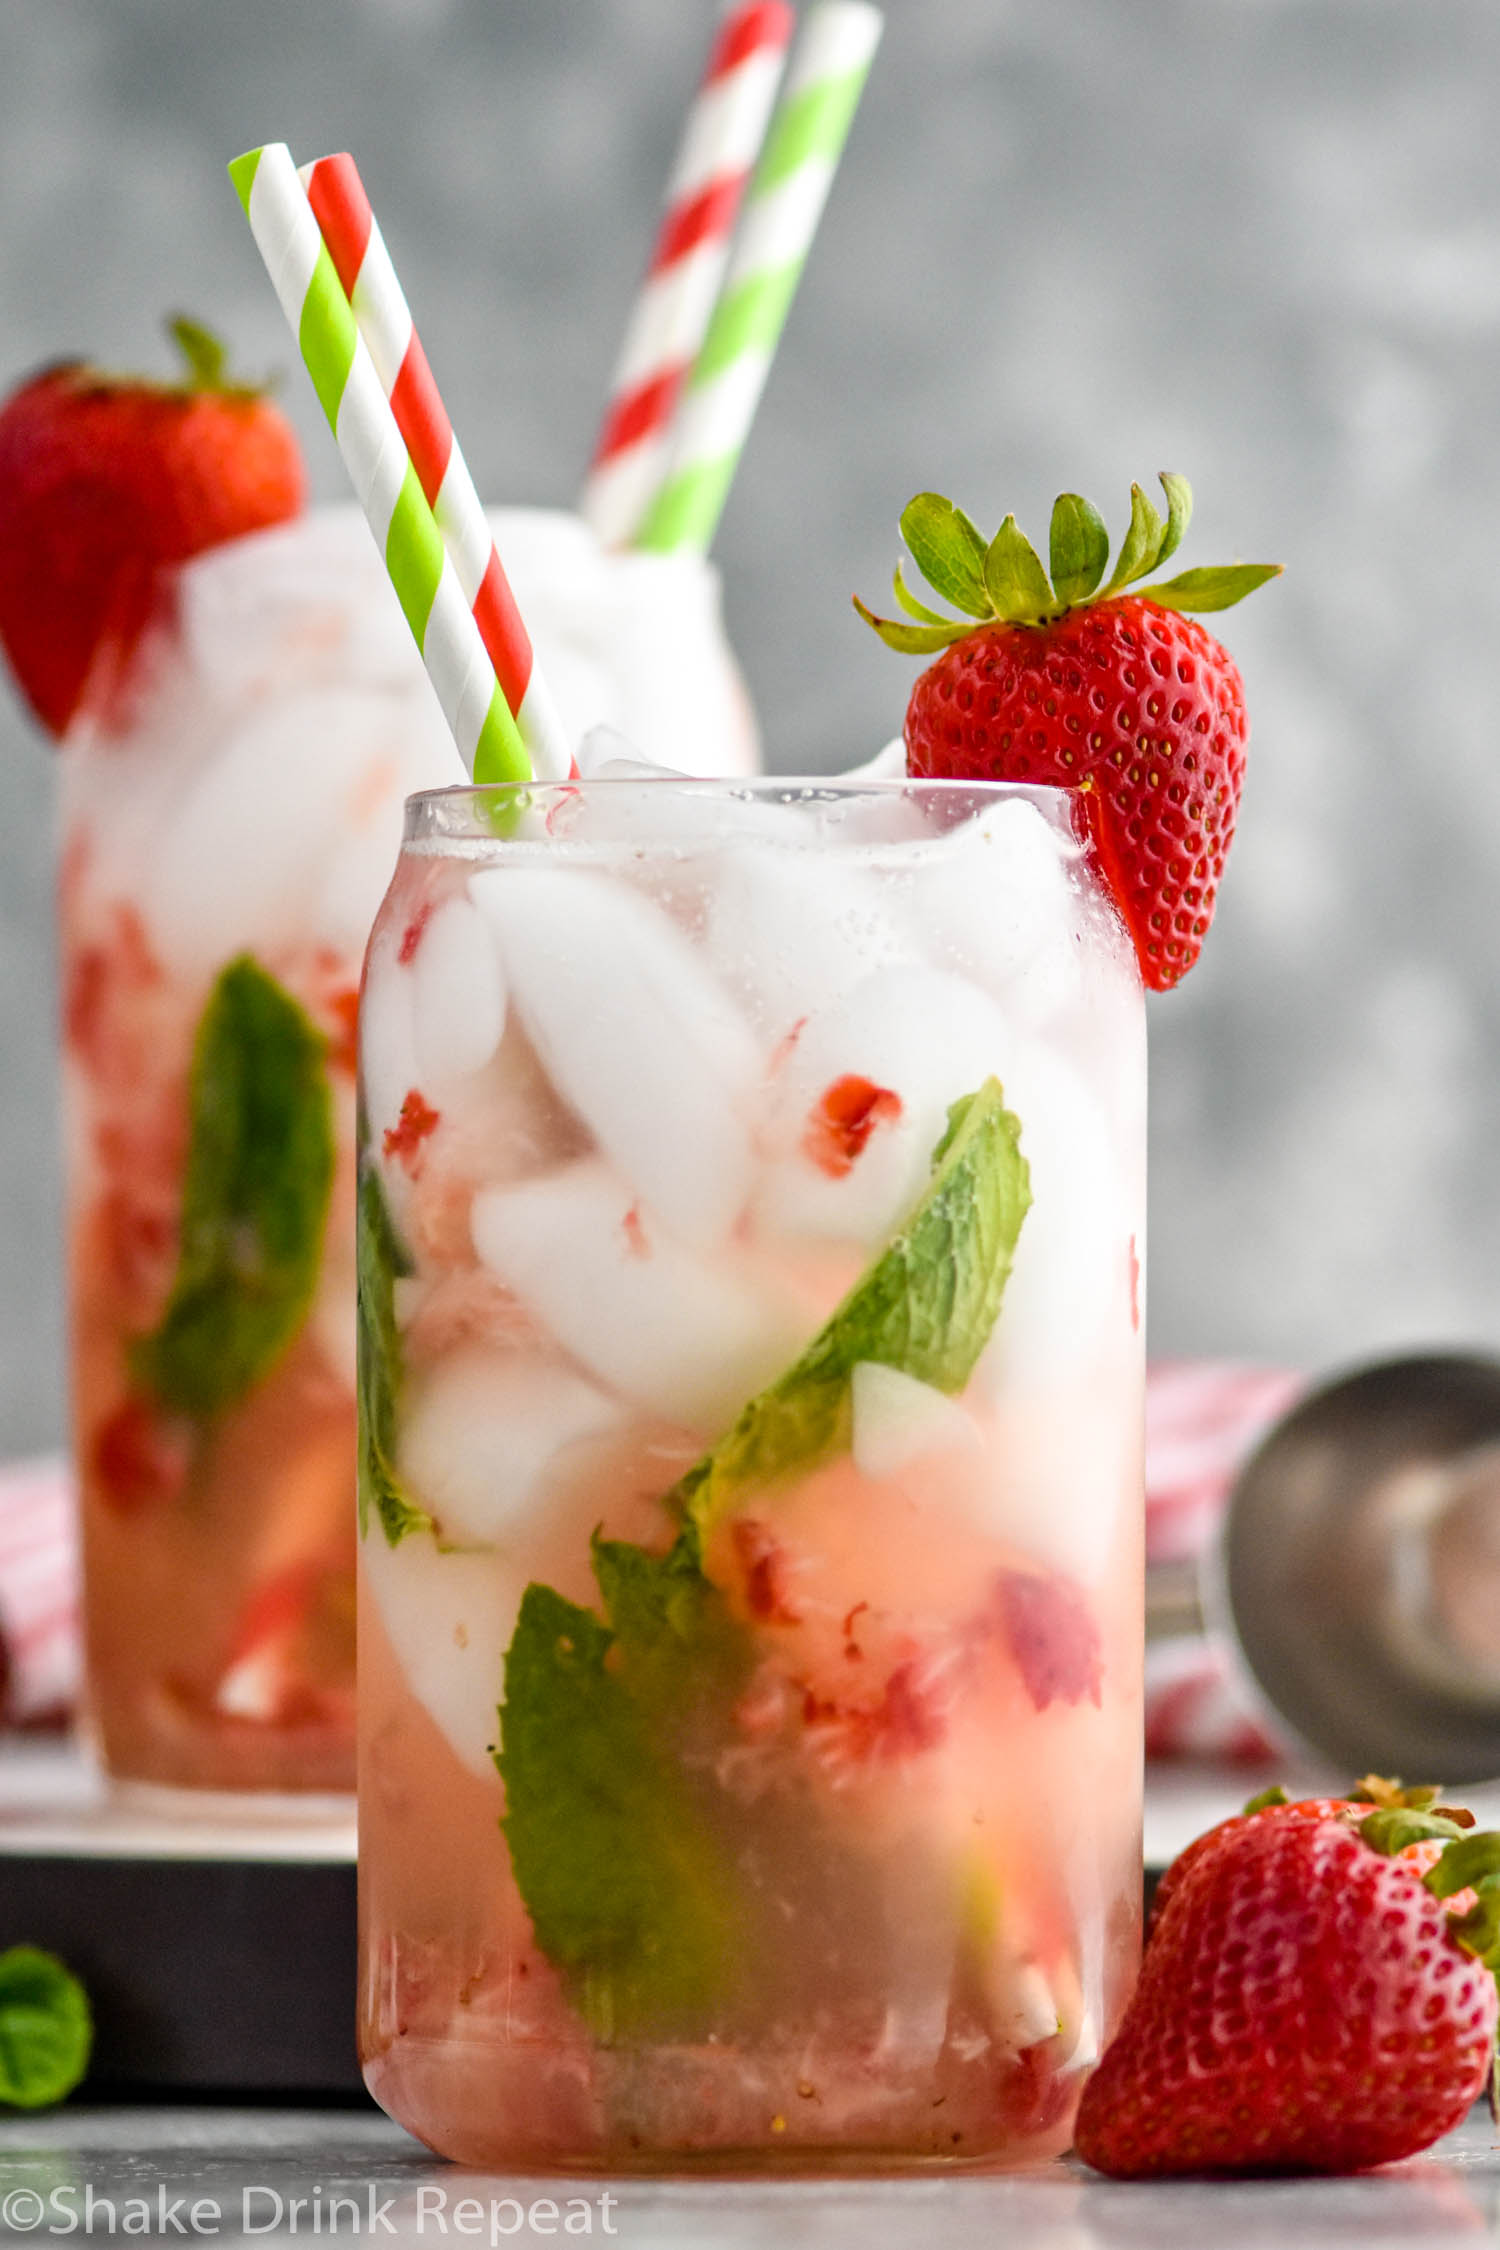 Side view of glass of strawberry mojito garnished with a strawberry on the rim and straws. Another strawberry mojito in the background. Strawberries on counter beside glass.